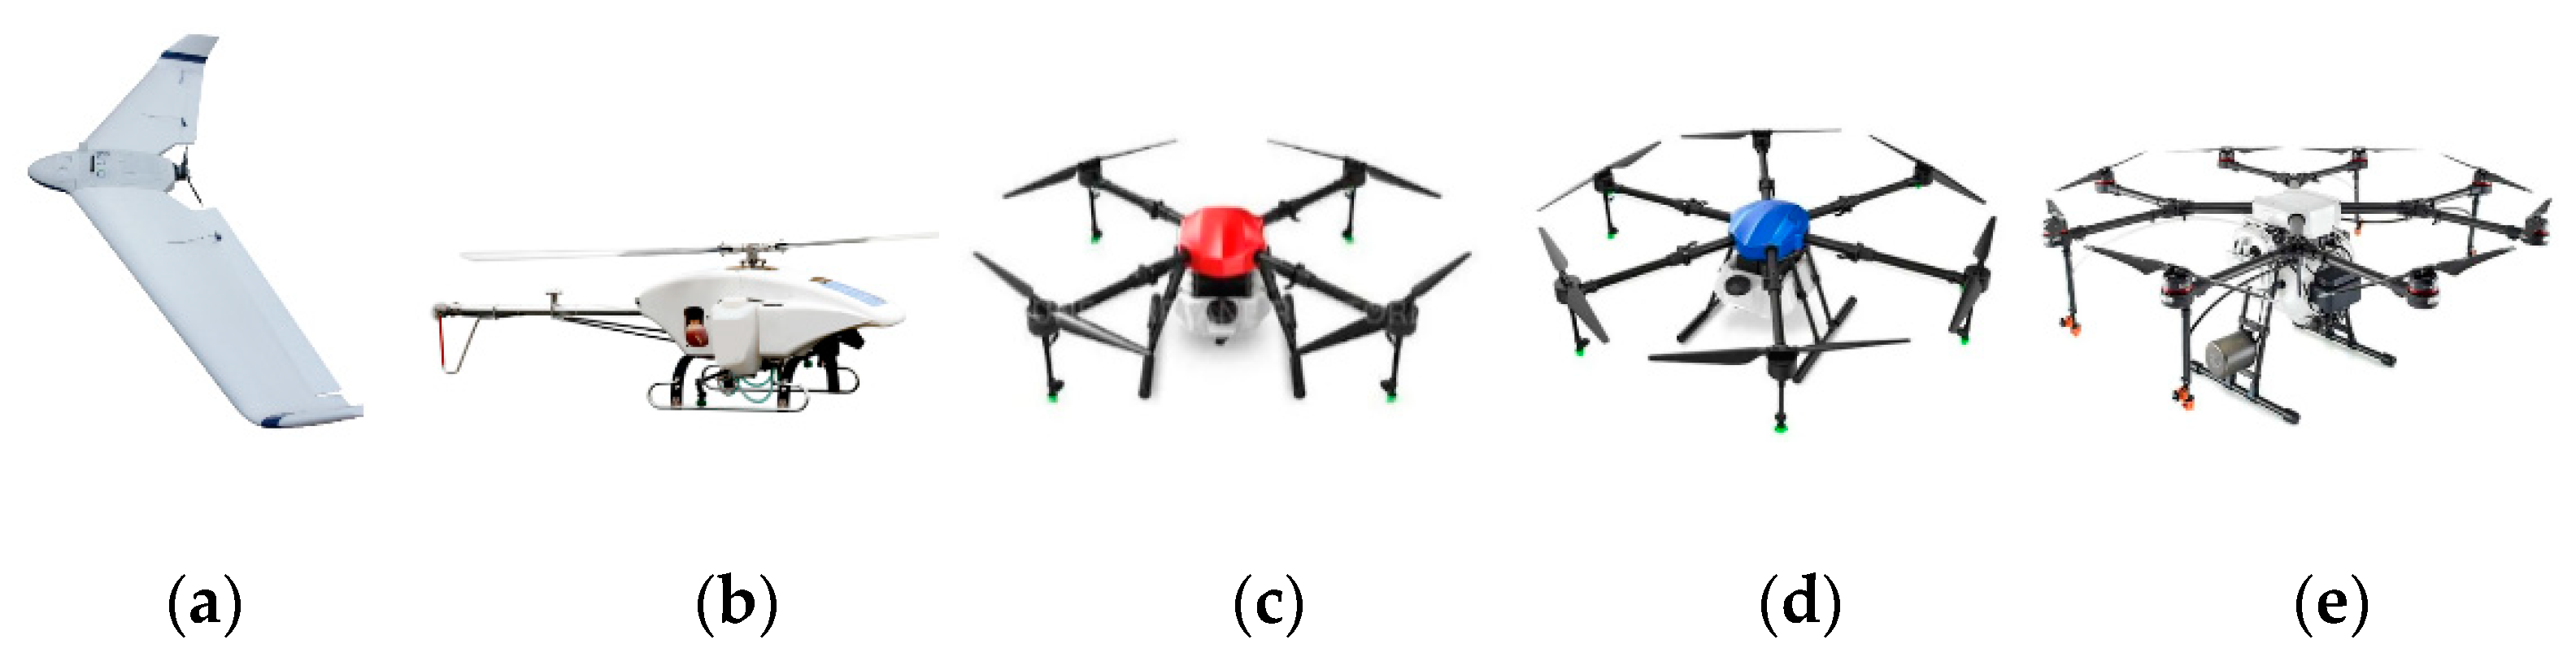 Deudor Arrugas Desanimarse Drones | Free Full-Text | Independent Control Spraying System for UAV-Based  Precise Variable Sprayer: A Review